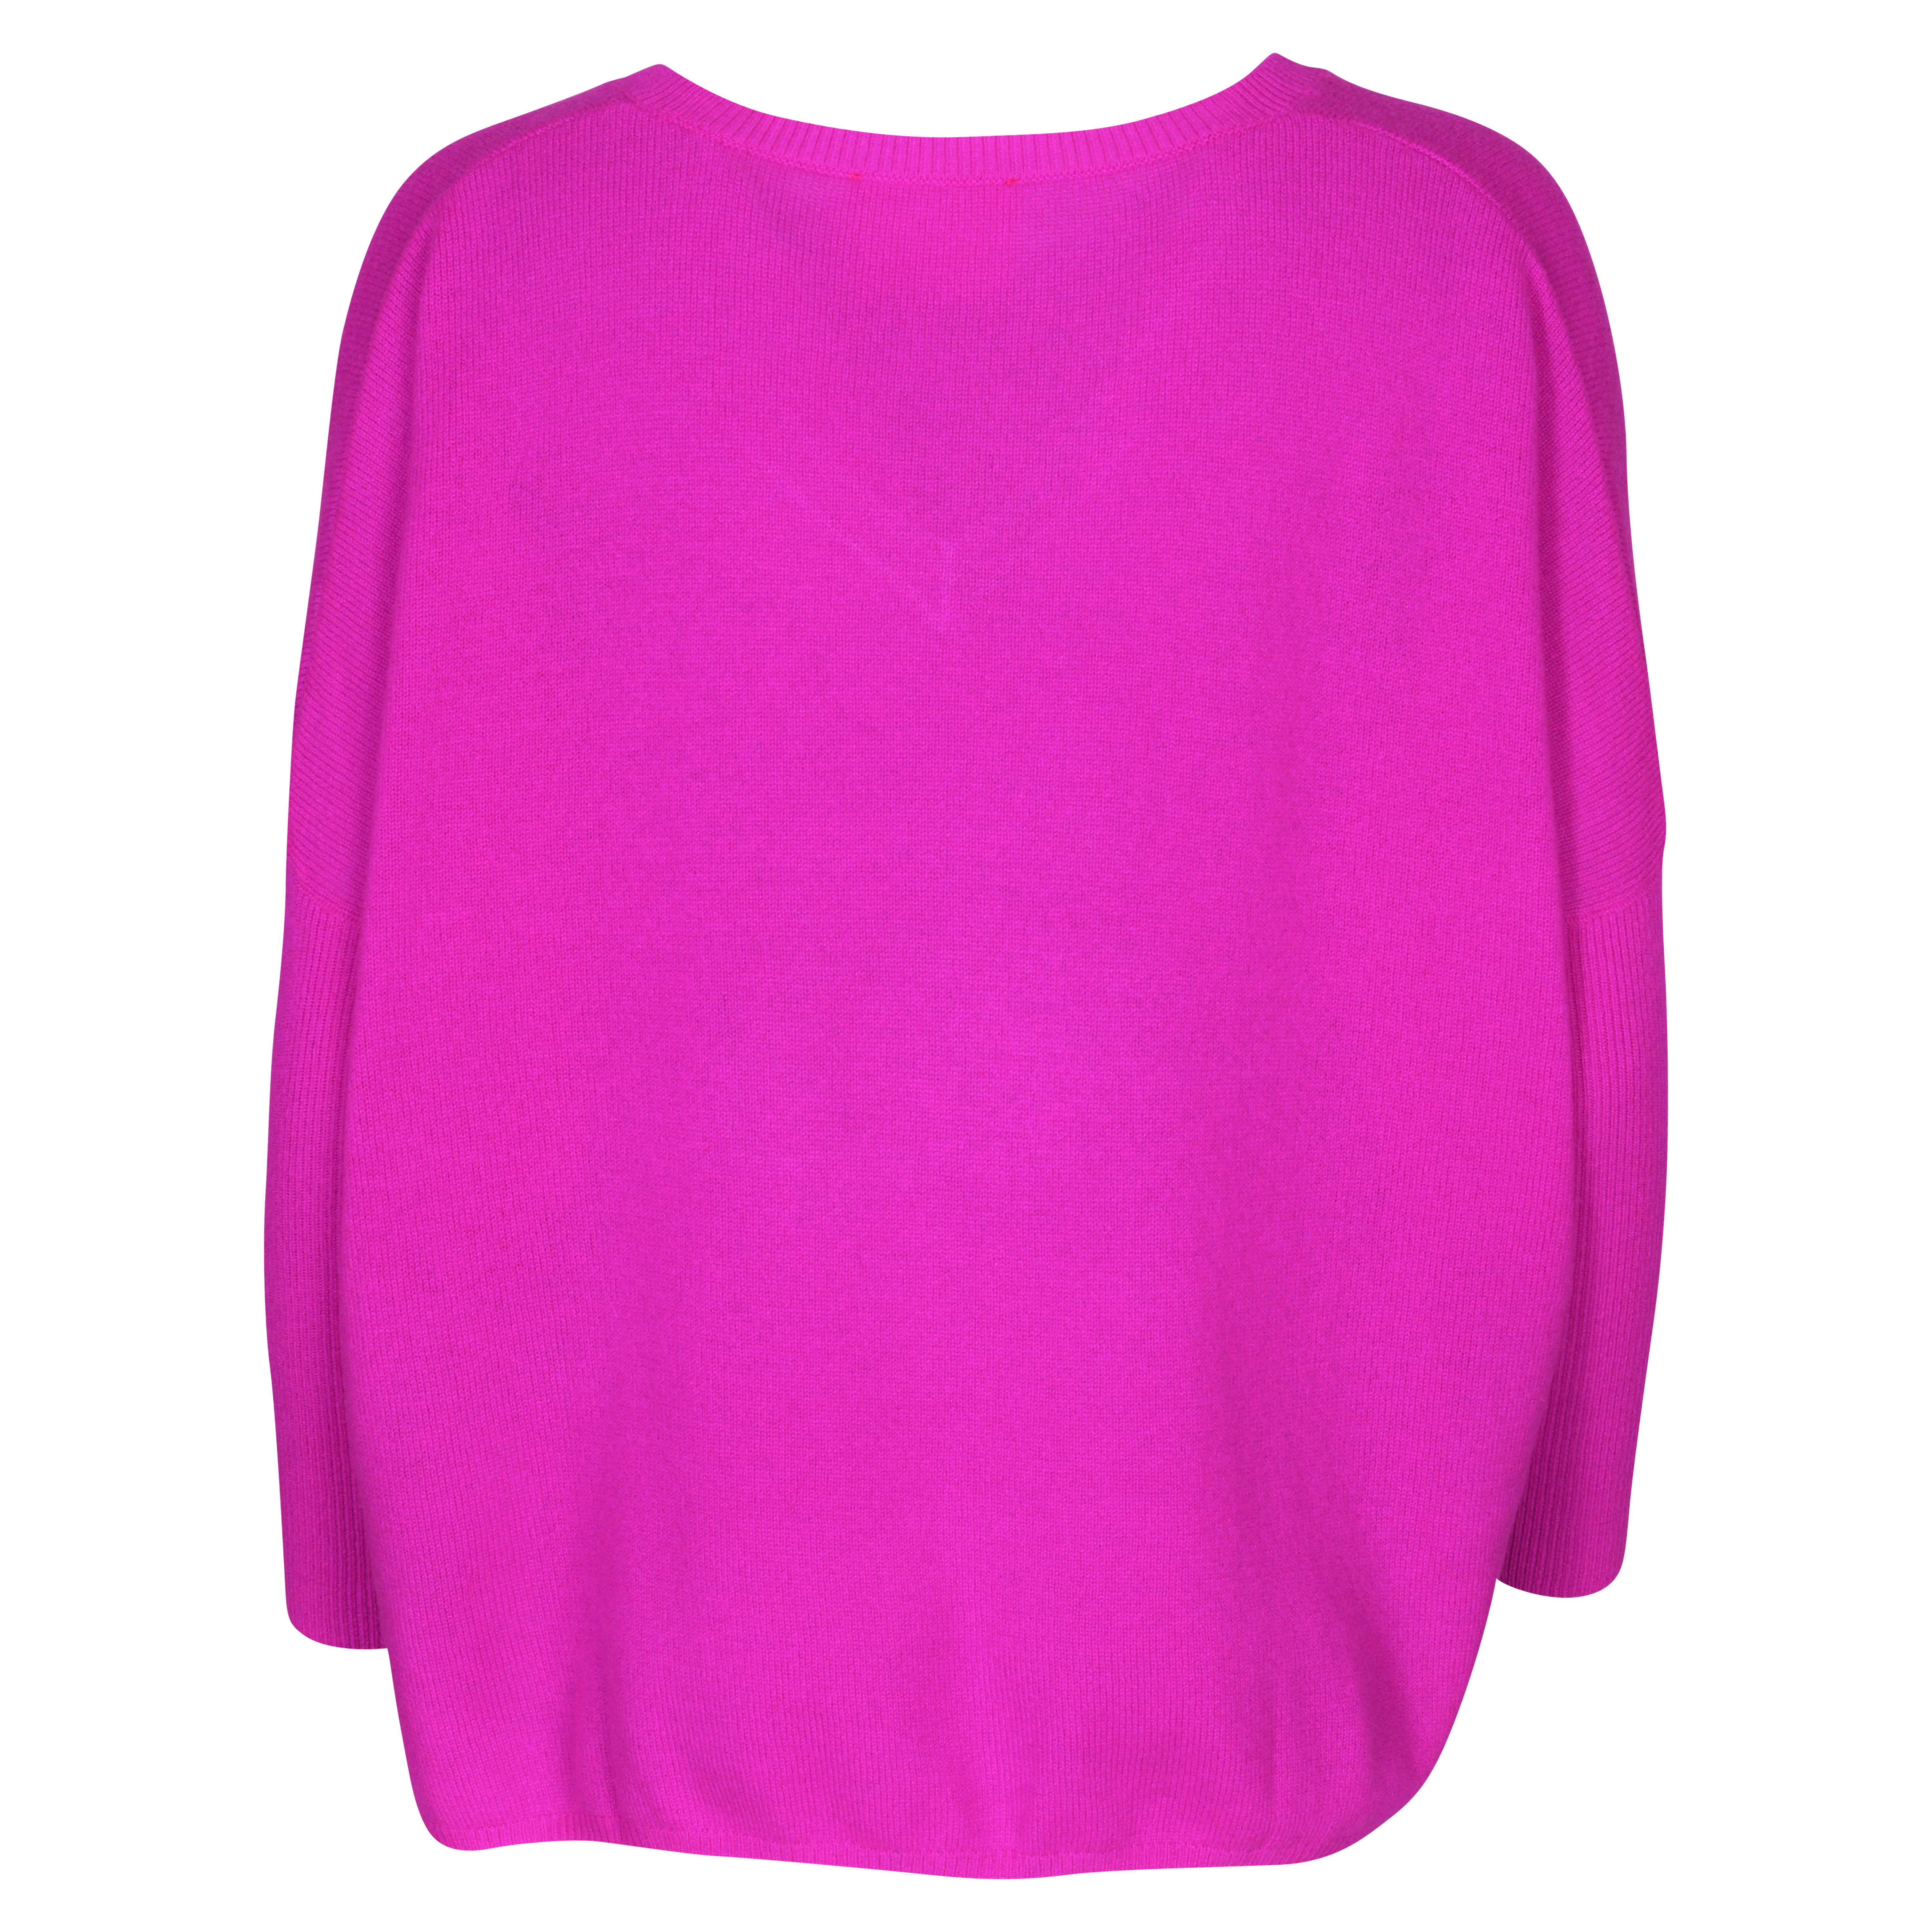 Absolut Cashmere Poncho Sweater in Violet Fluo M